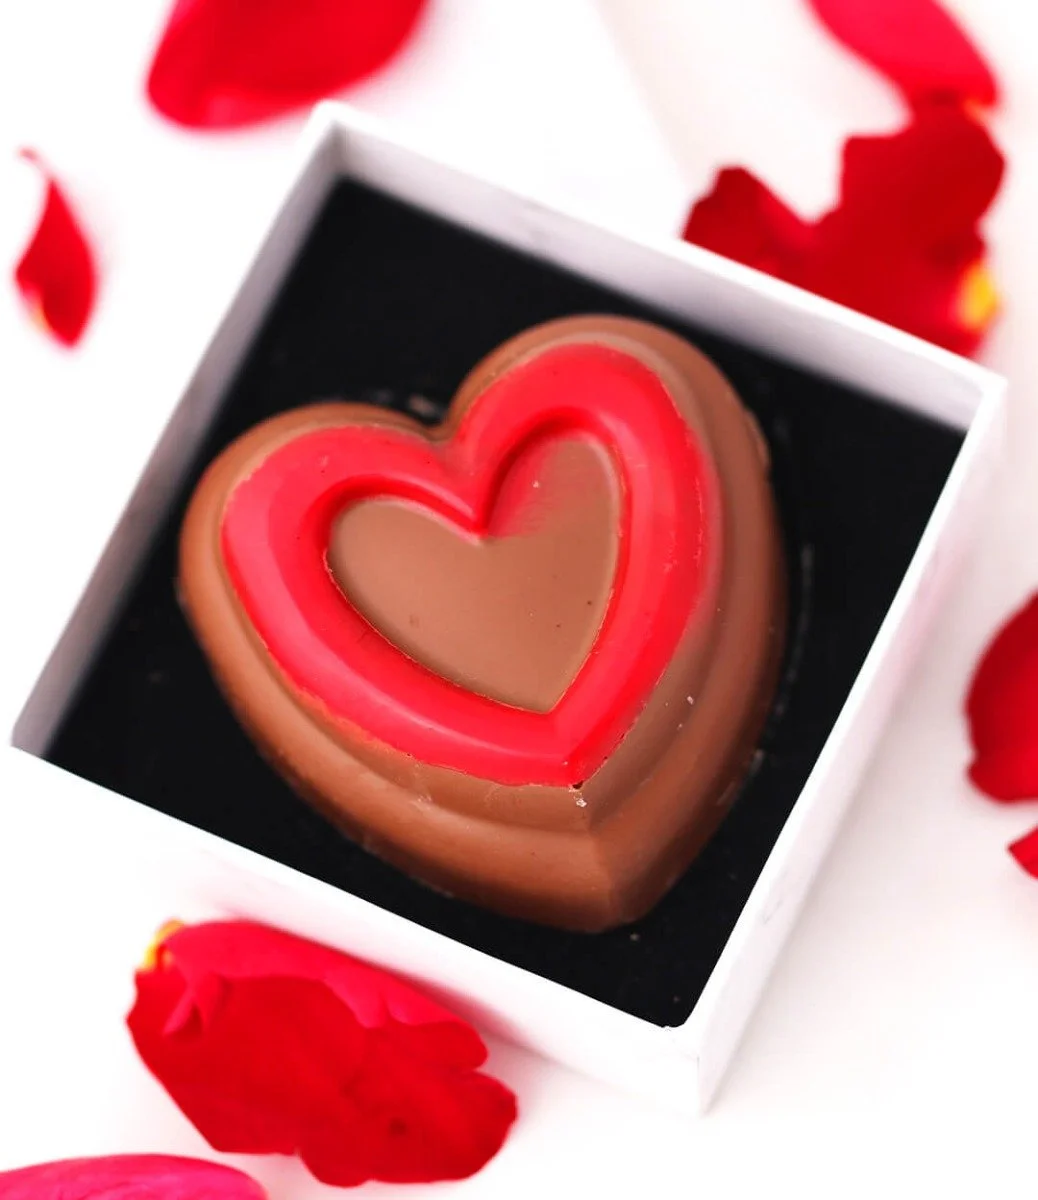 Le Coeur Valentine's Chocolate by NJD